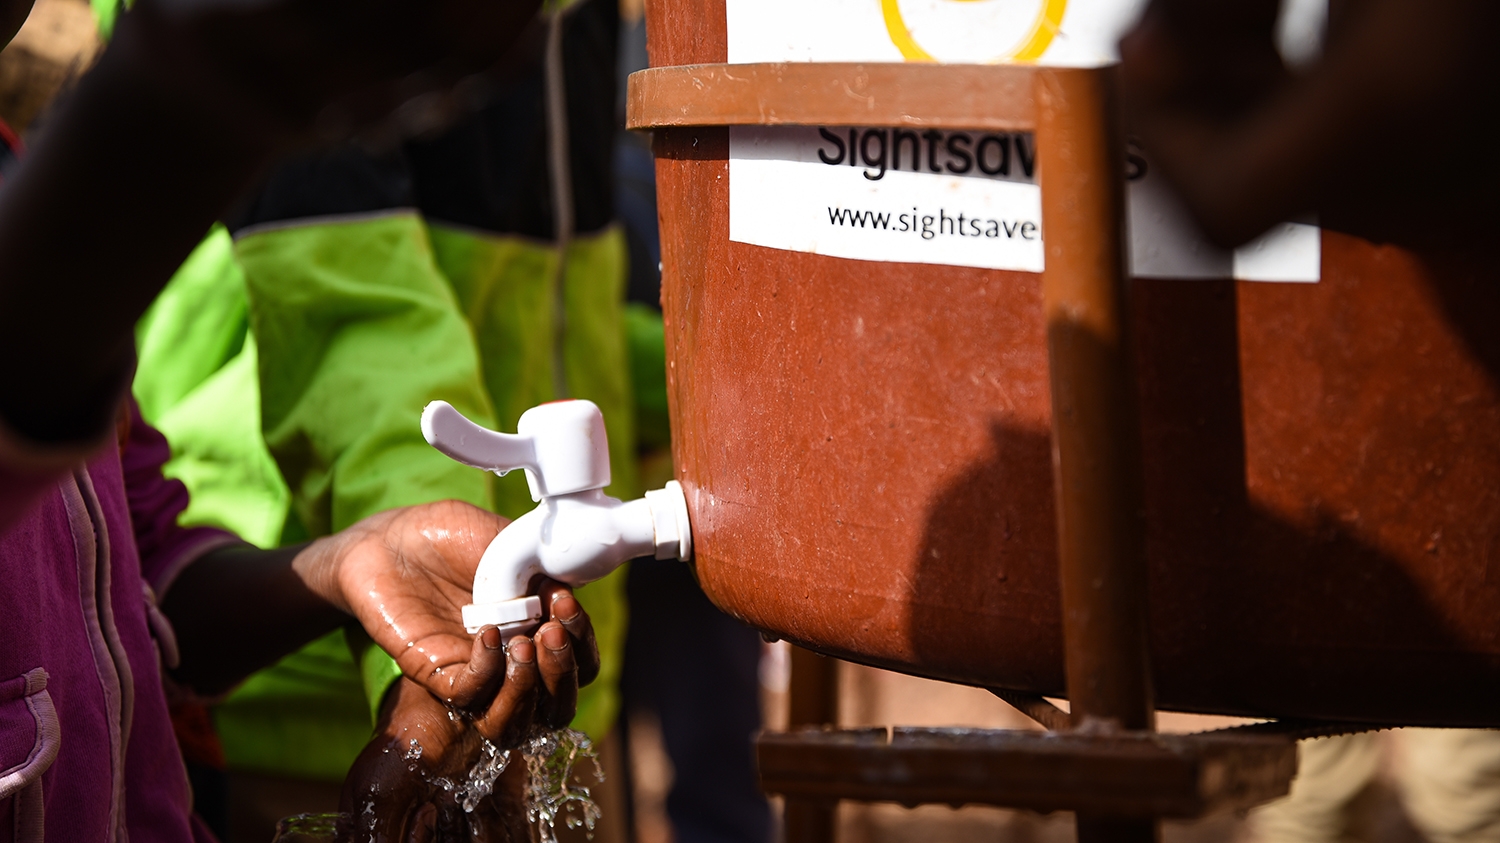 A close-up of someone washing their hands under a tap from a mobile water dispenser. The Sightsavers logo is on the tank.